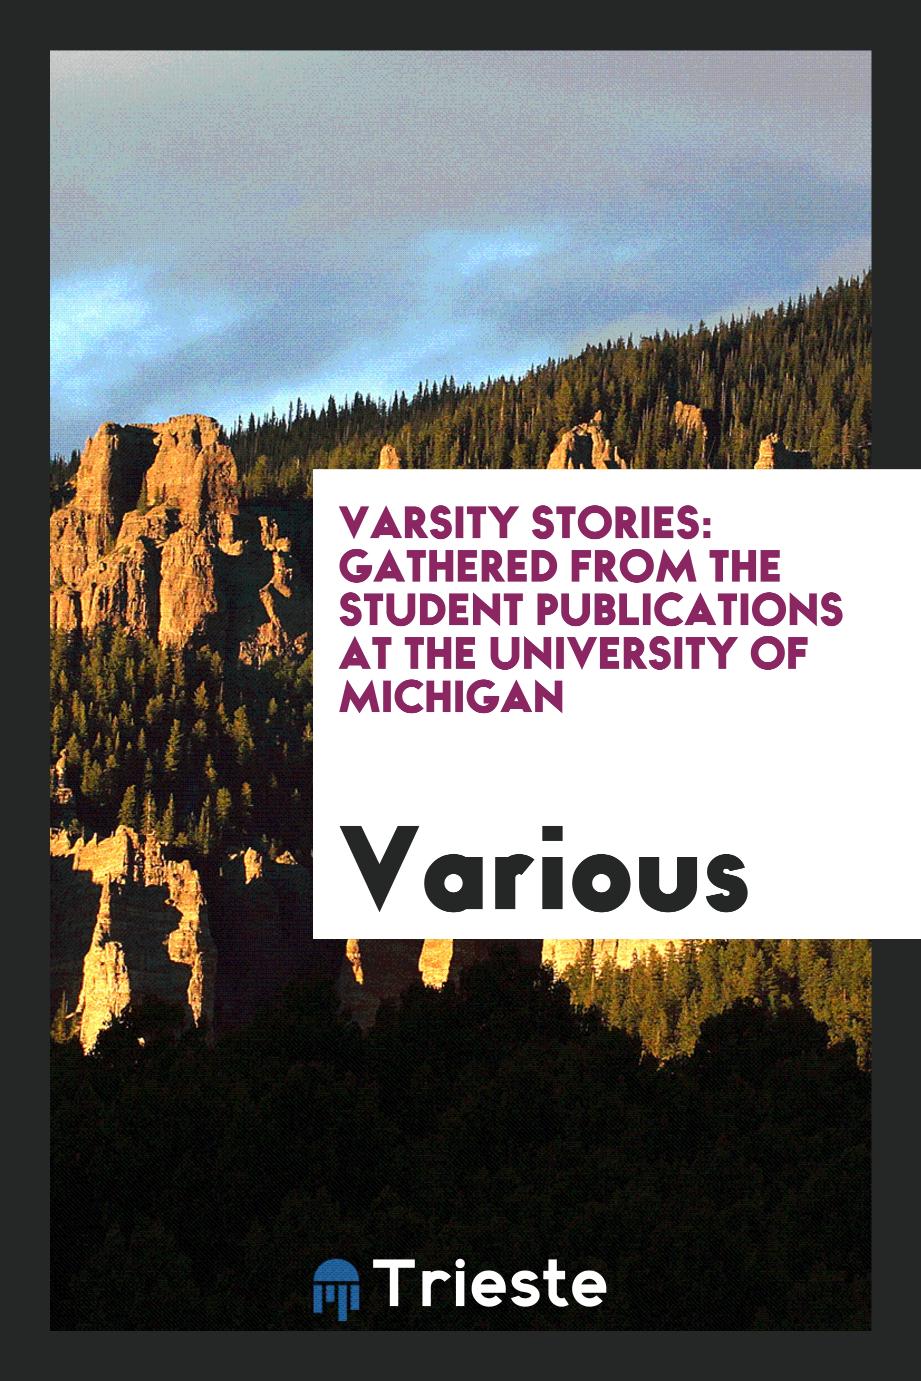 Varsity Stories: Gathered from the Student Publications at the University of Michigan